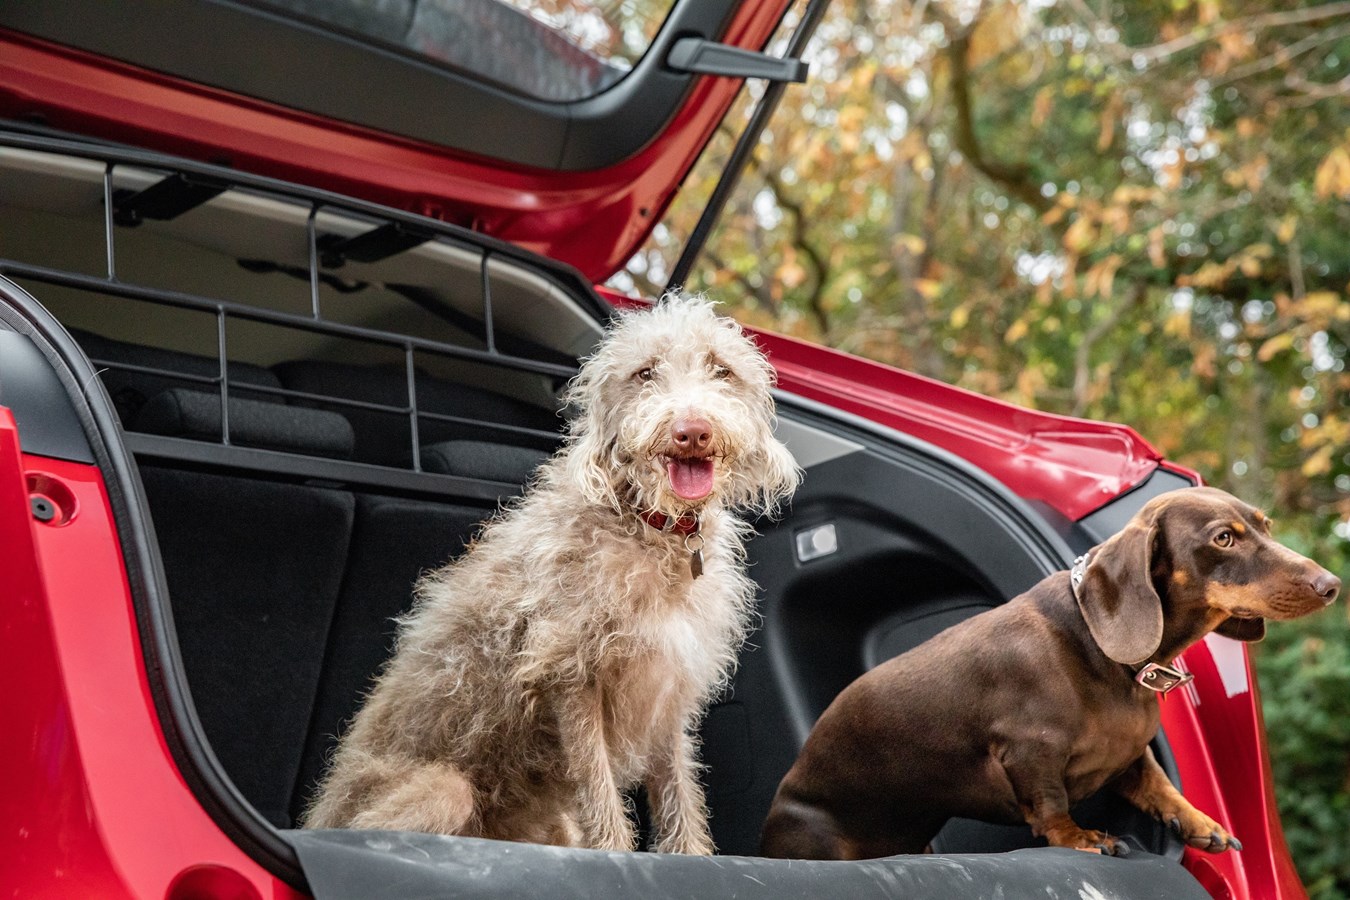 HONDA LAUNCHES NEW RANGE OF DOG ACCESSORIES, INSPIRED BY APRIL FOOLS’ DAY JOKE